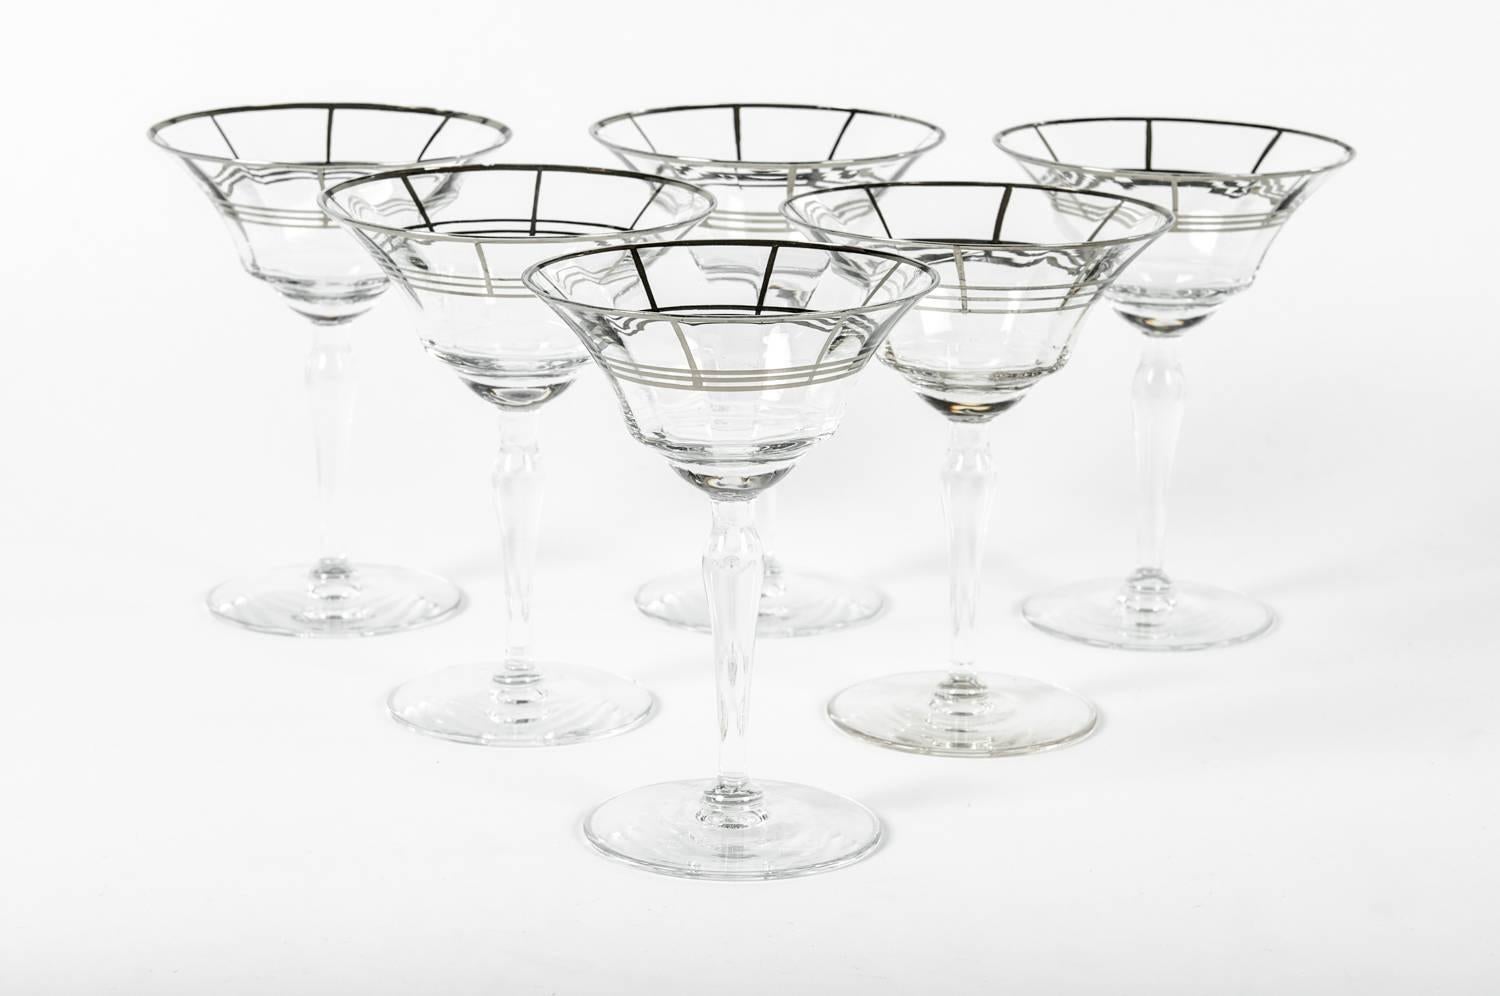 Vintage Art Deco Martini set of six glasses. Excellent condition. Each glass measure 6 inches high X 4.5 inches diameter.